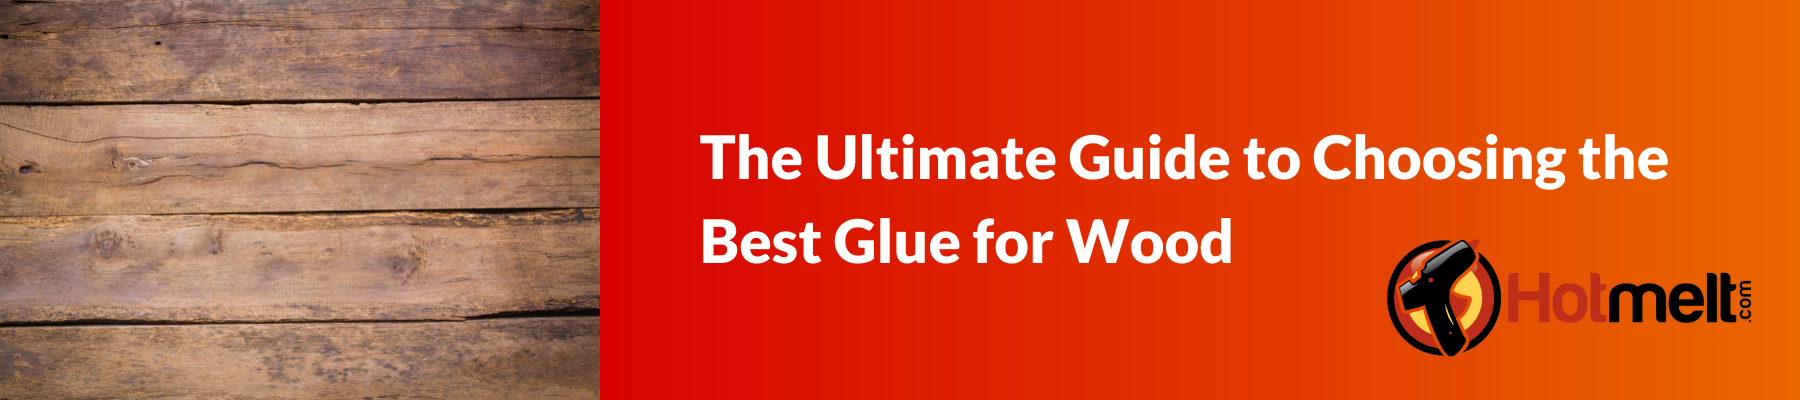 5 Types of Wood Glue: How to Use Them and How to Choose the Right One -  Creativity Hero